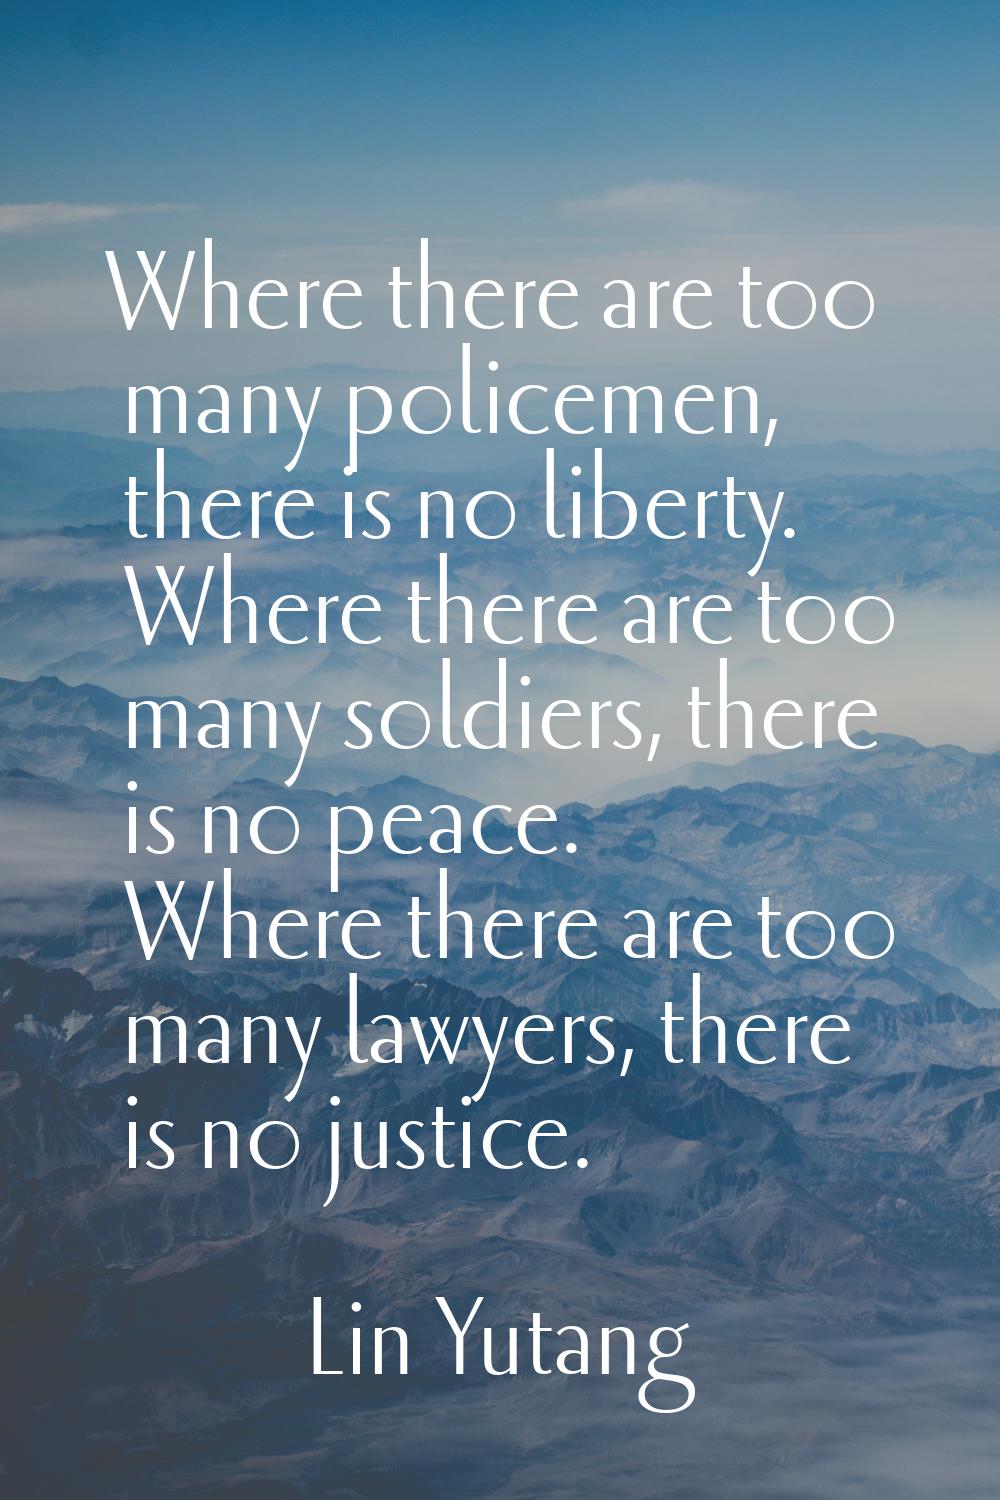 Where there are too many policemen, there is no liberty. Where there are too many soldiers, there i